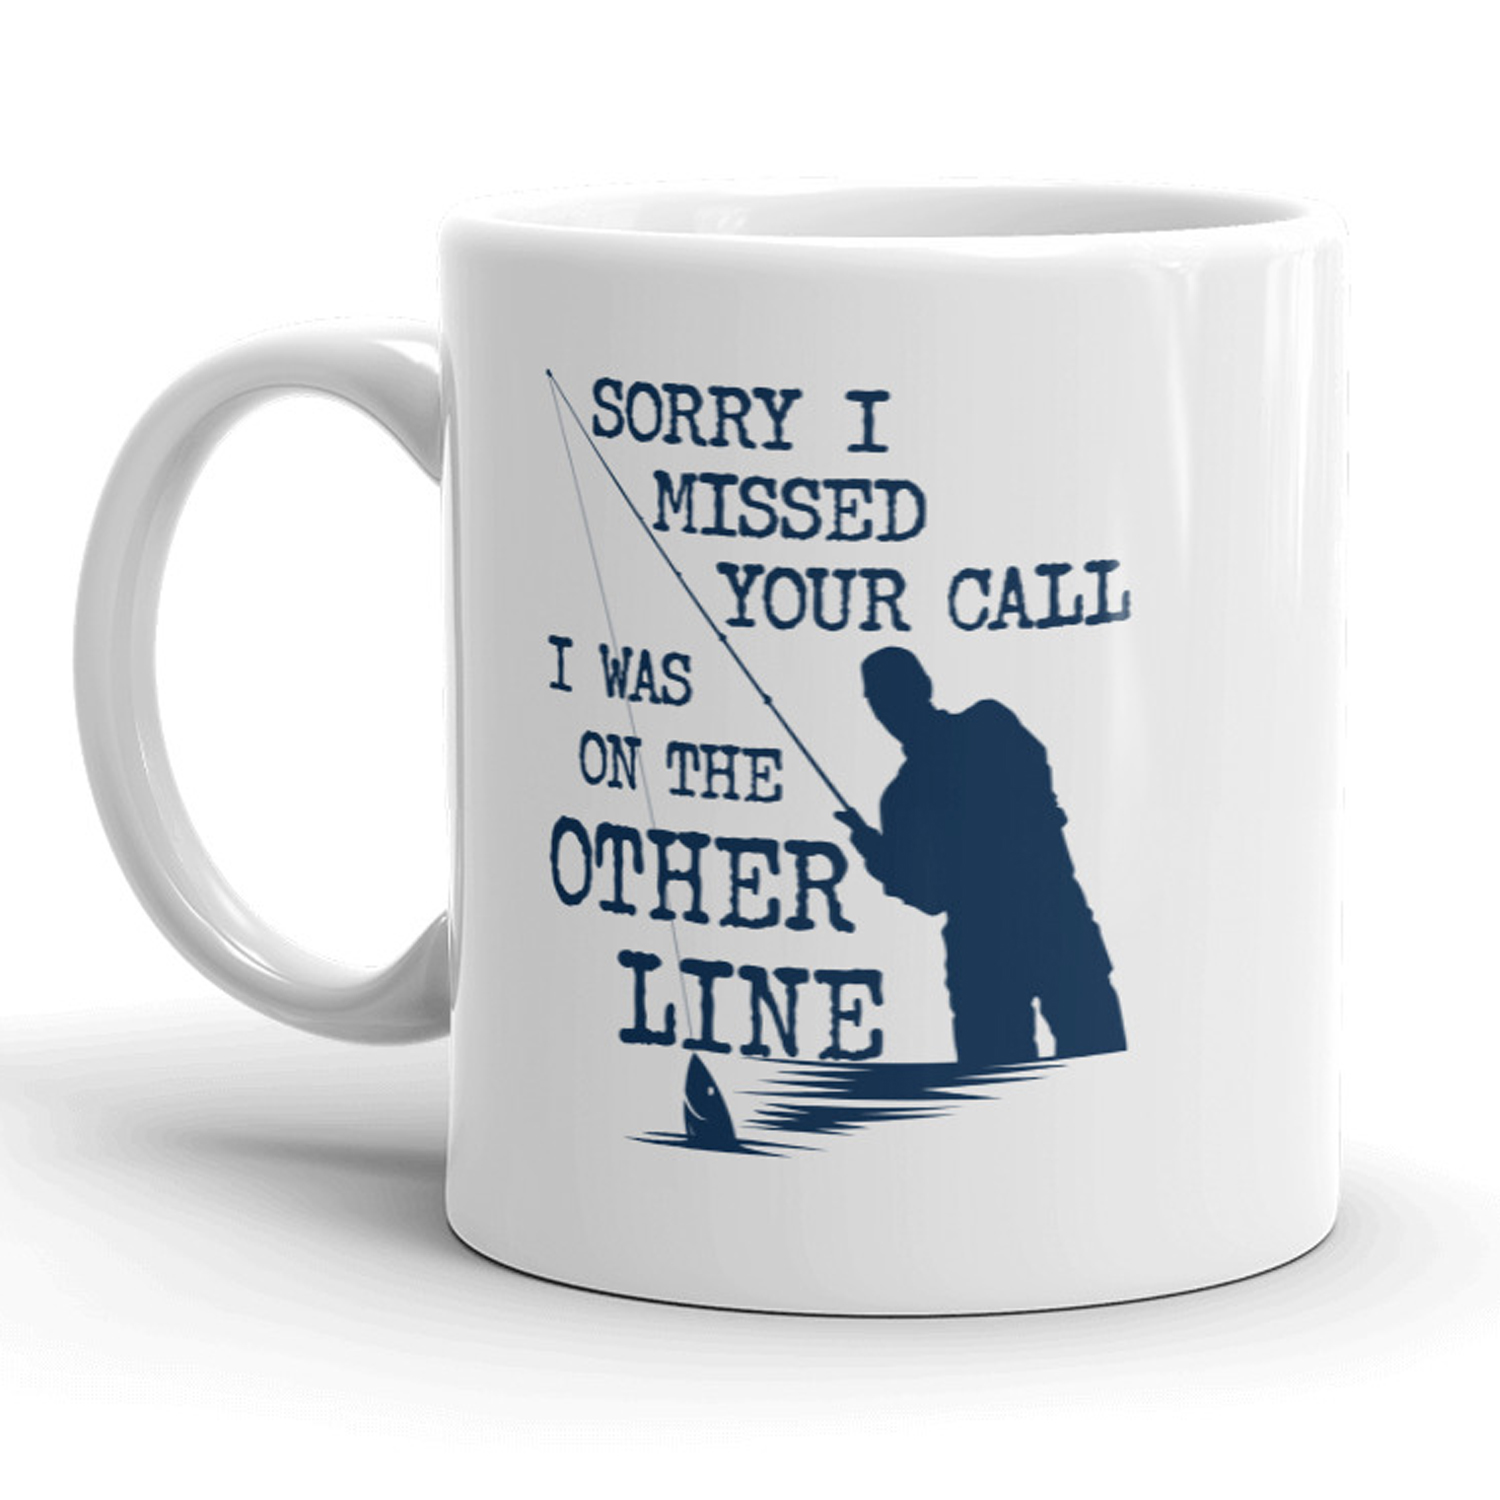 Crazy Dog Tshirts Sorry I Missed Your Call I Was On The Other Line Mug Funny Fishing Coffee Cup - 11oz